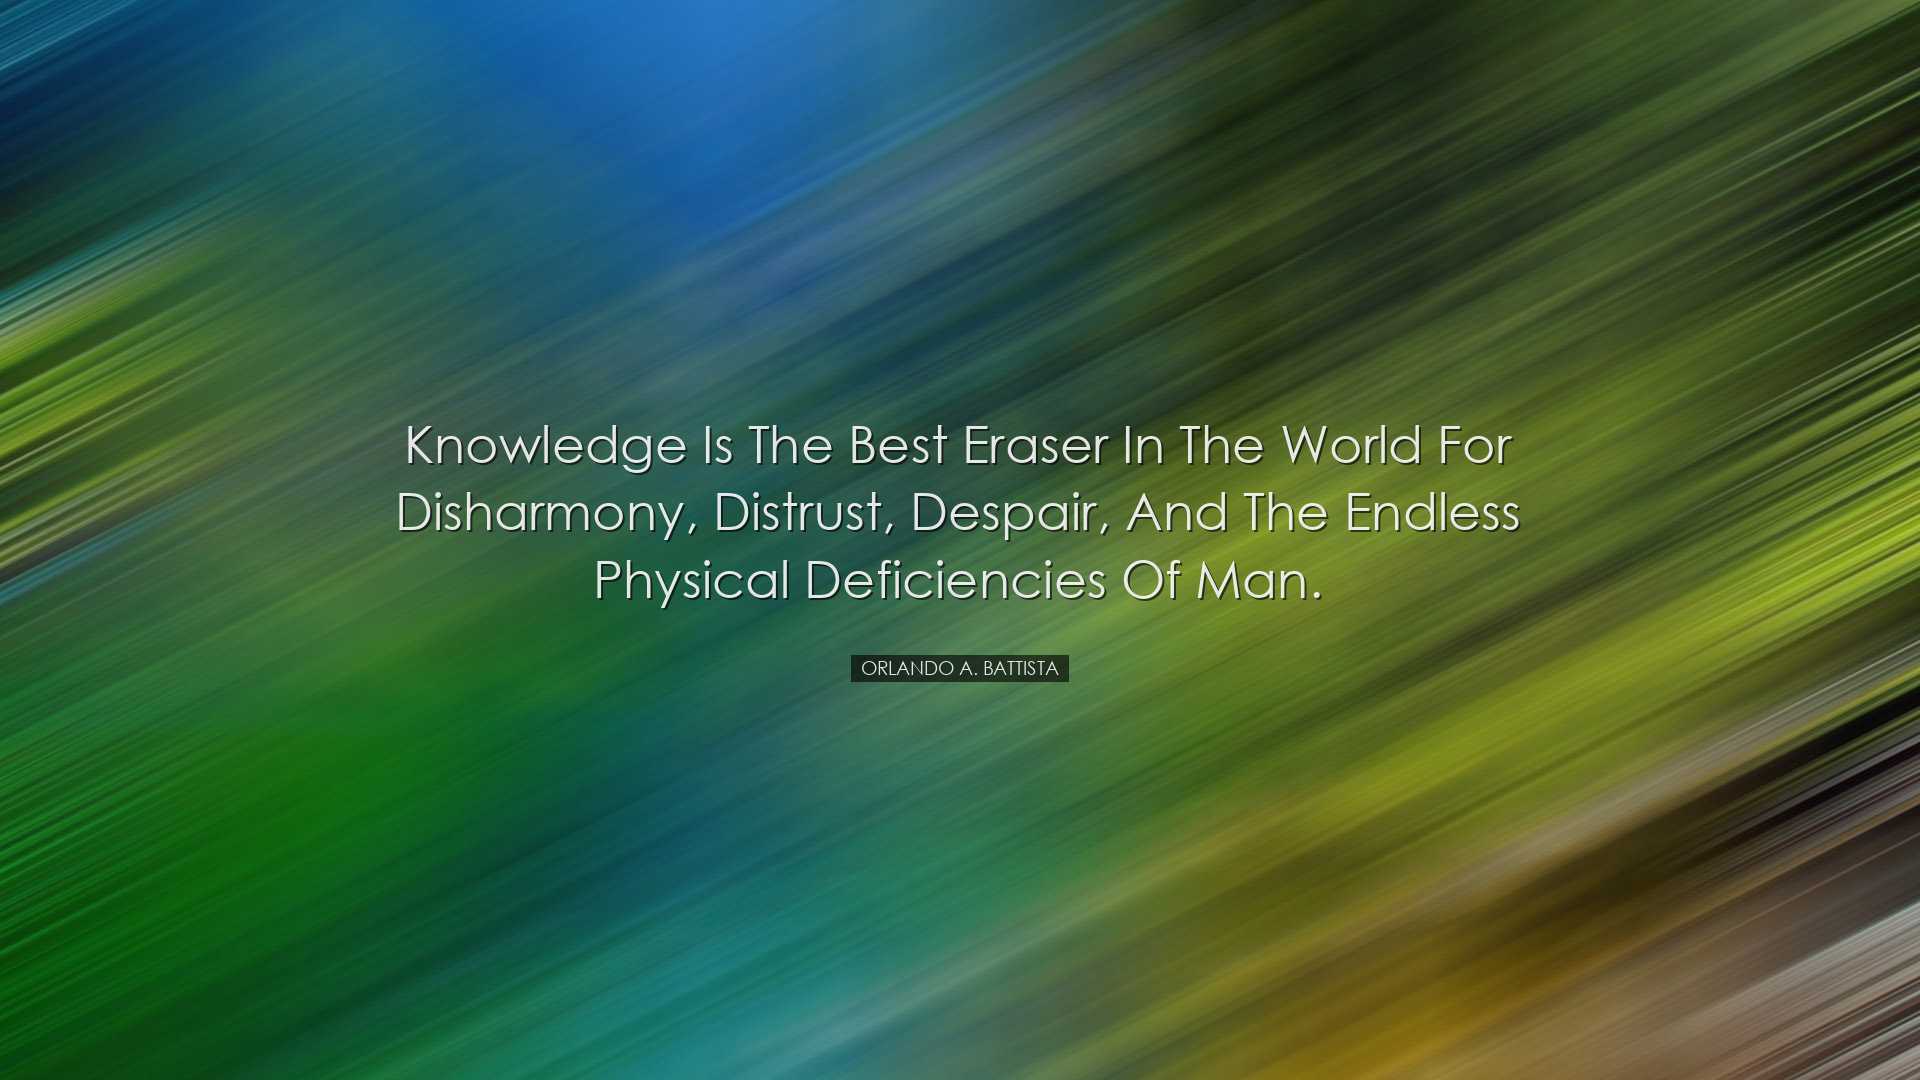 Knowledge is the best eraser in the world for disharmony, distrust